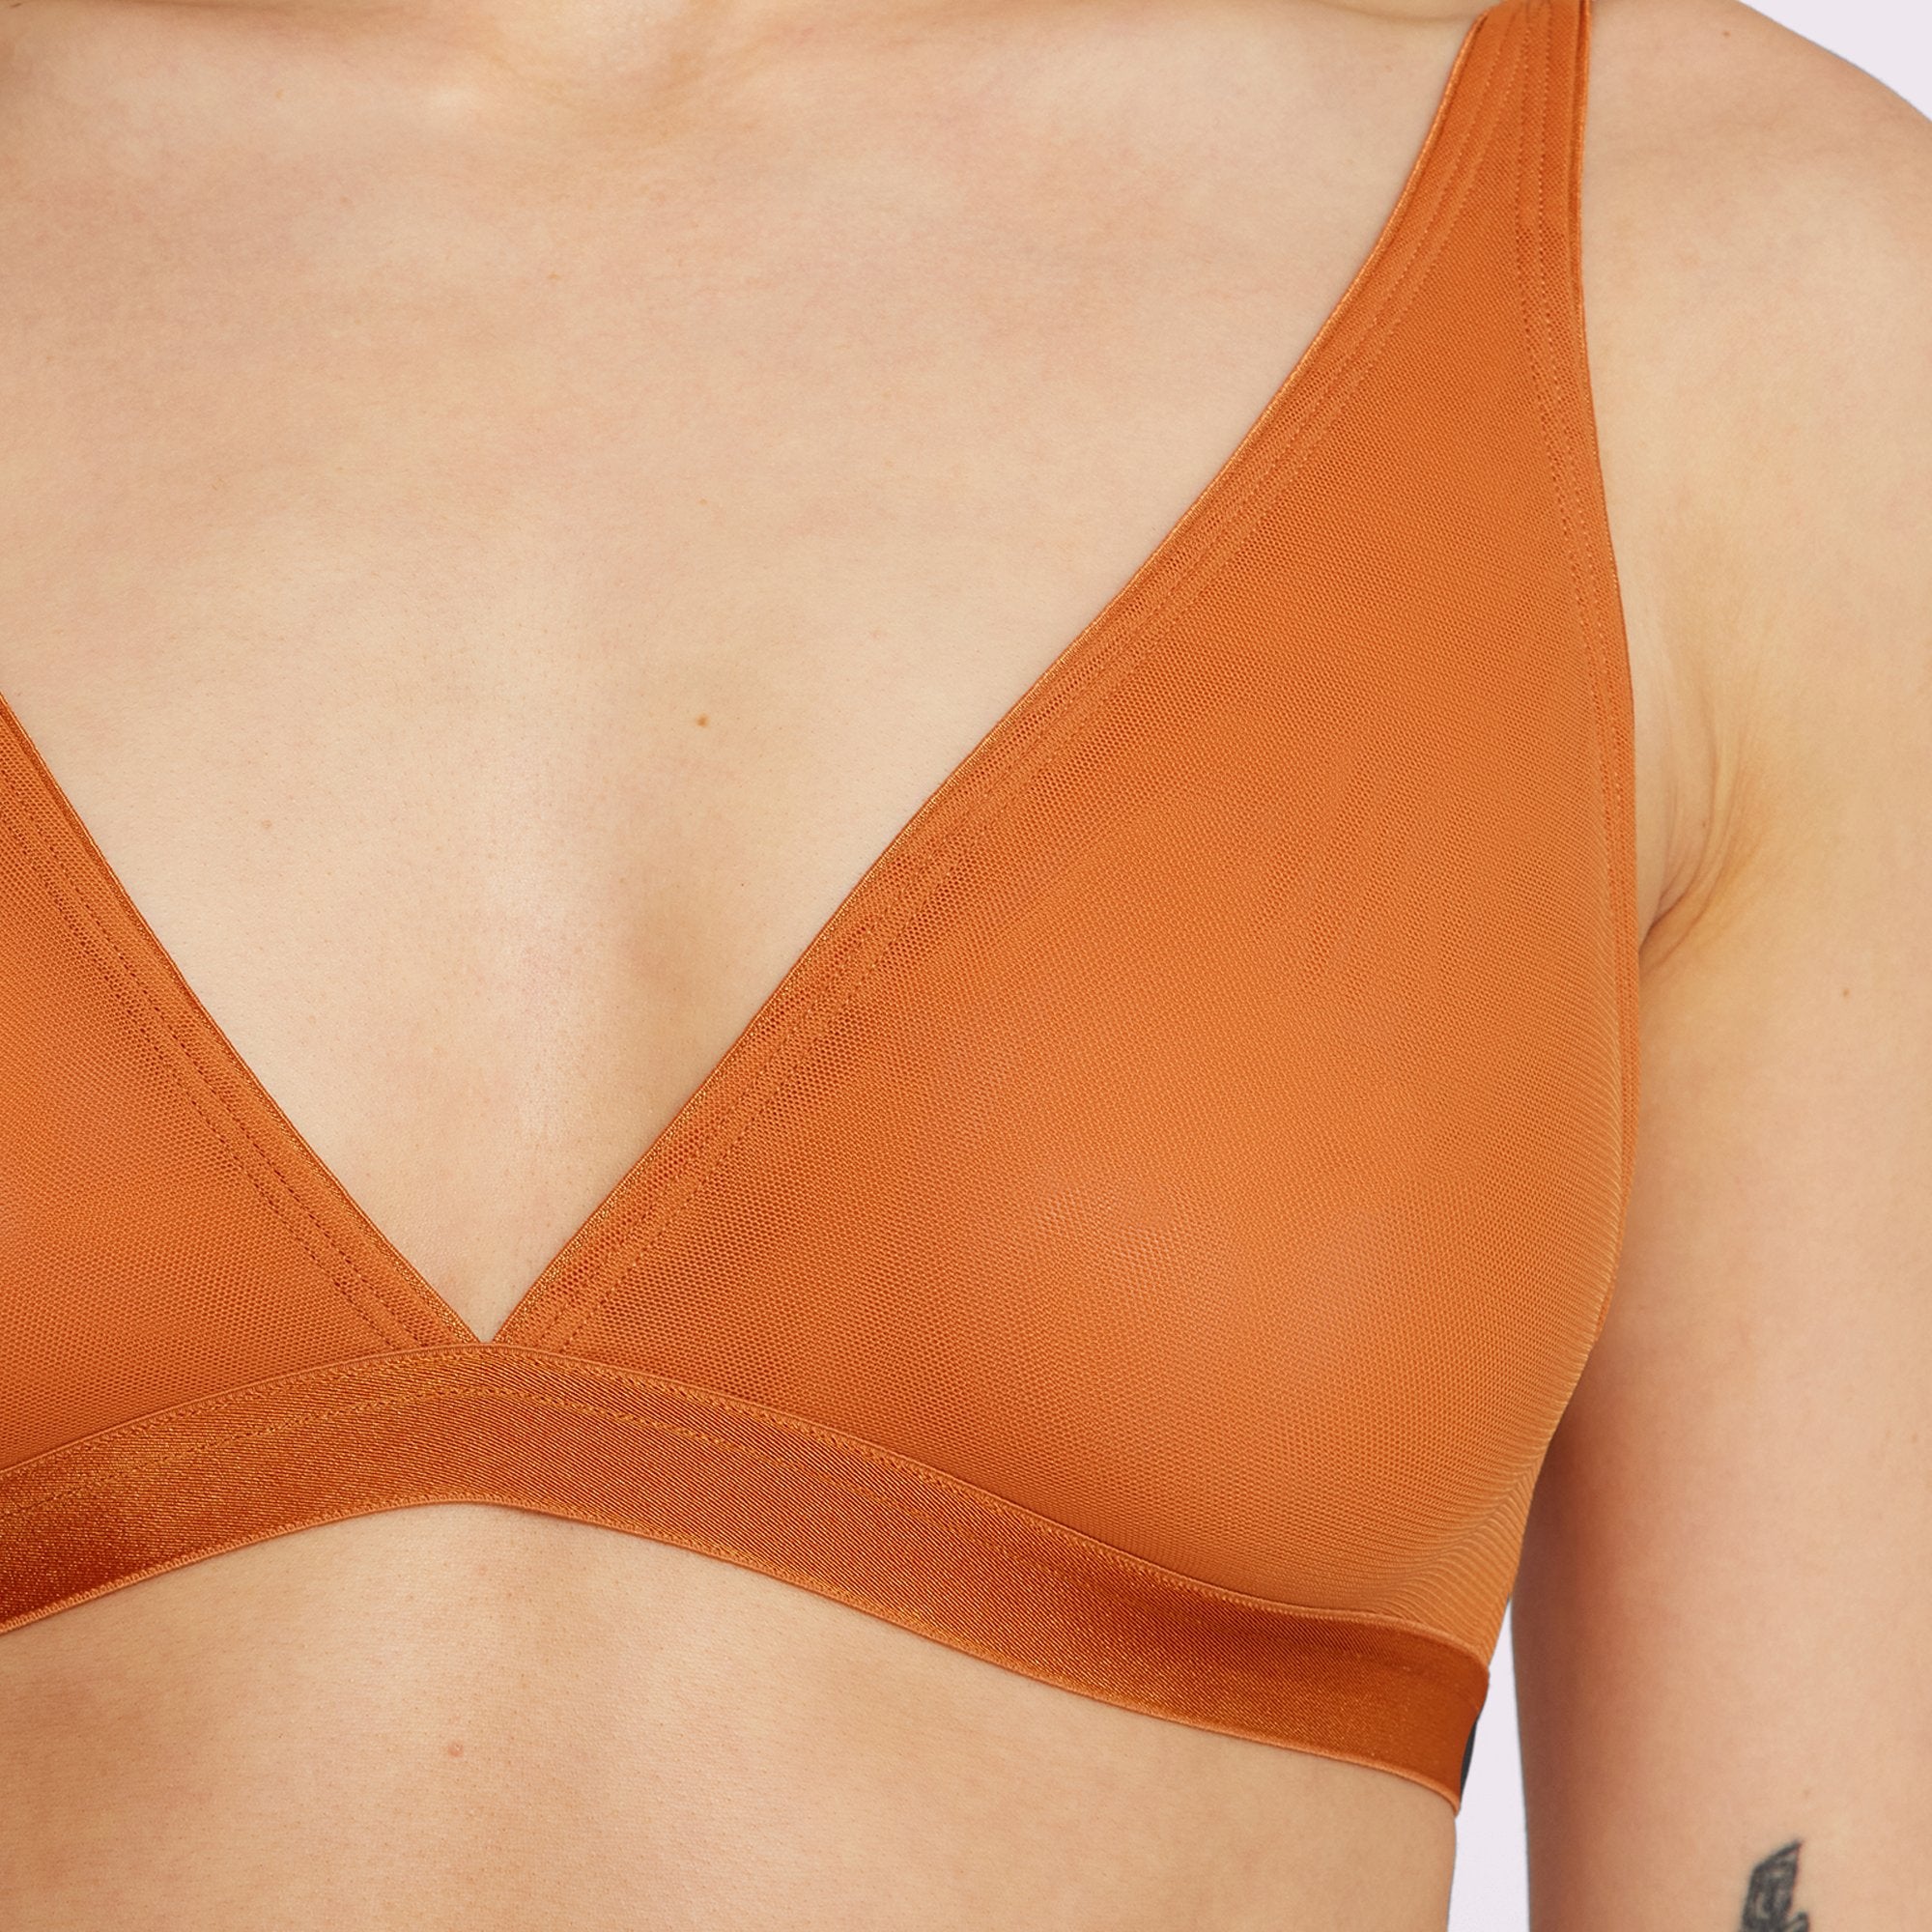 Parade's New Silky Mesh Collection Is Too Hot *Not* To Show Off